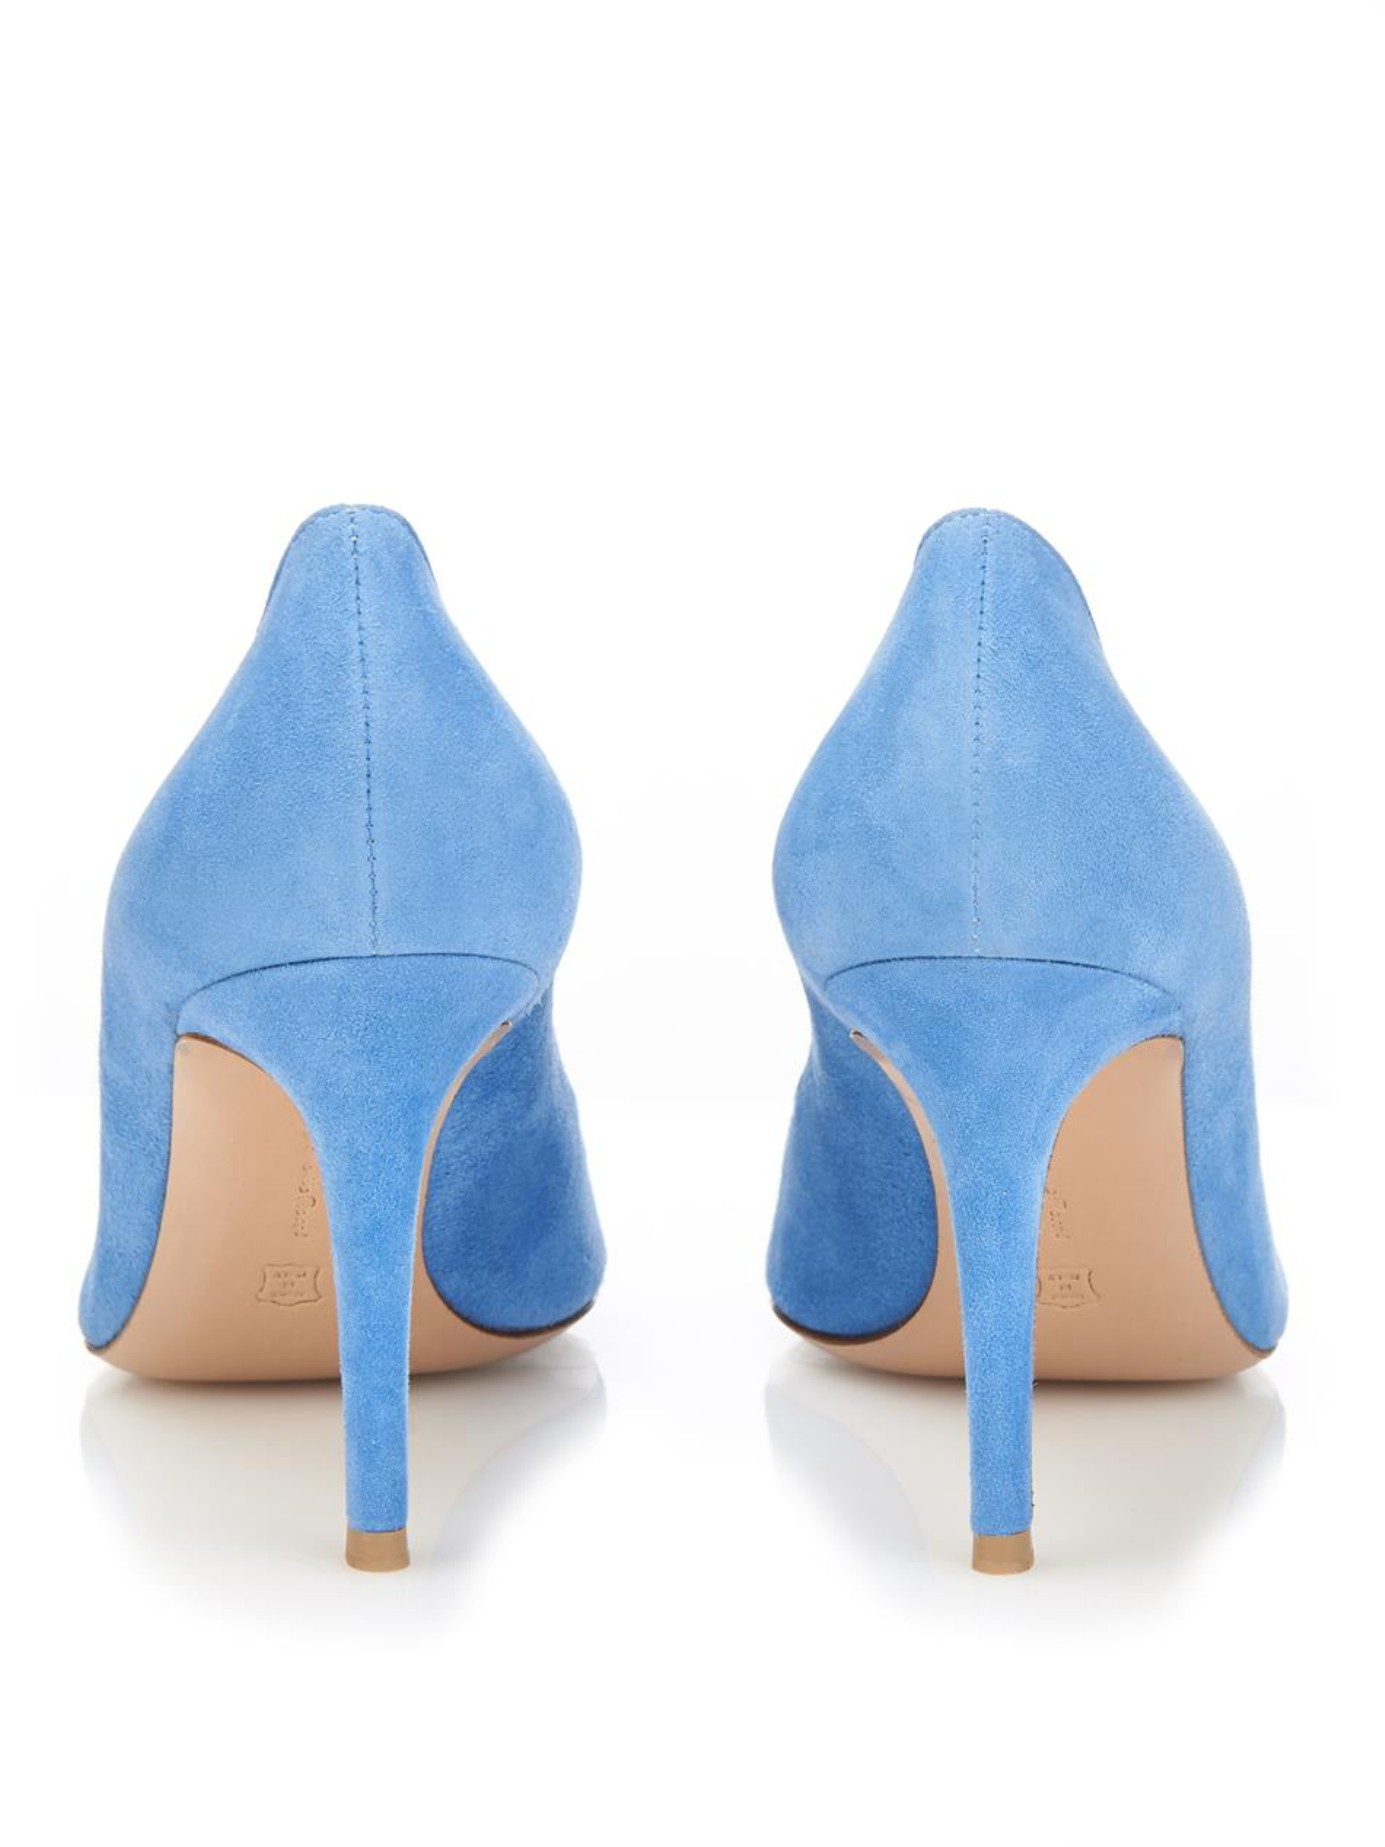 Gianvito Rossi Business Point-Toe Suede Pumps in Blue | Lyst